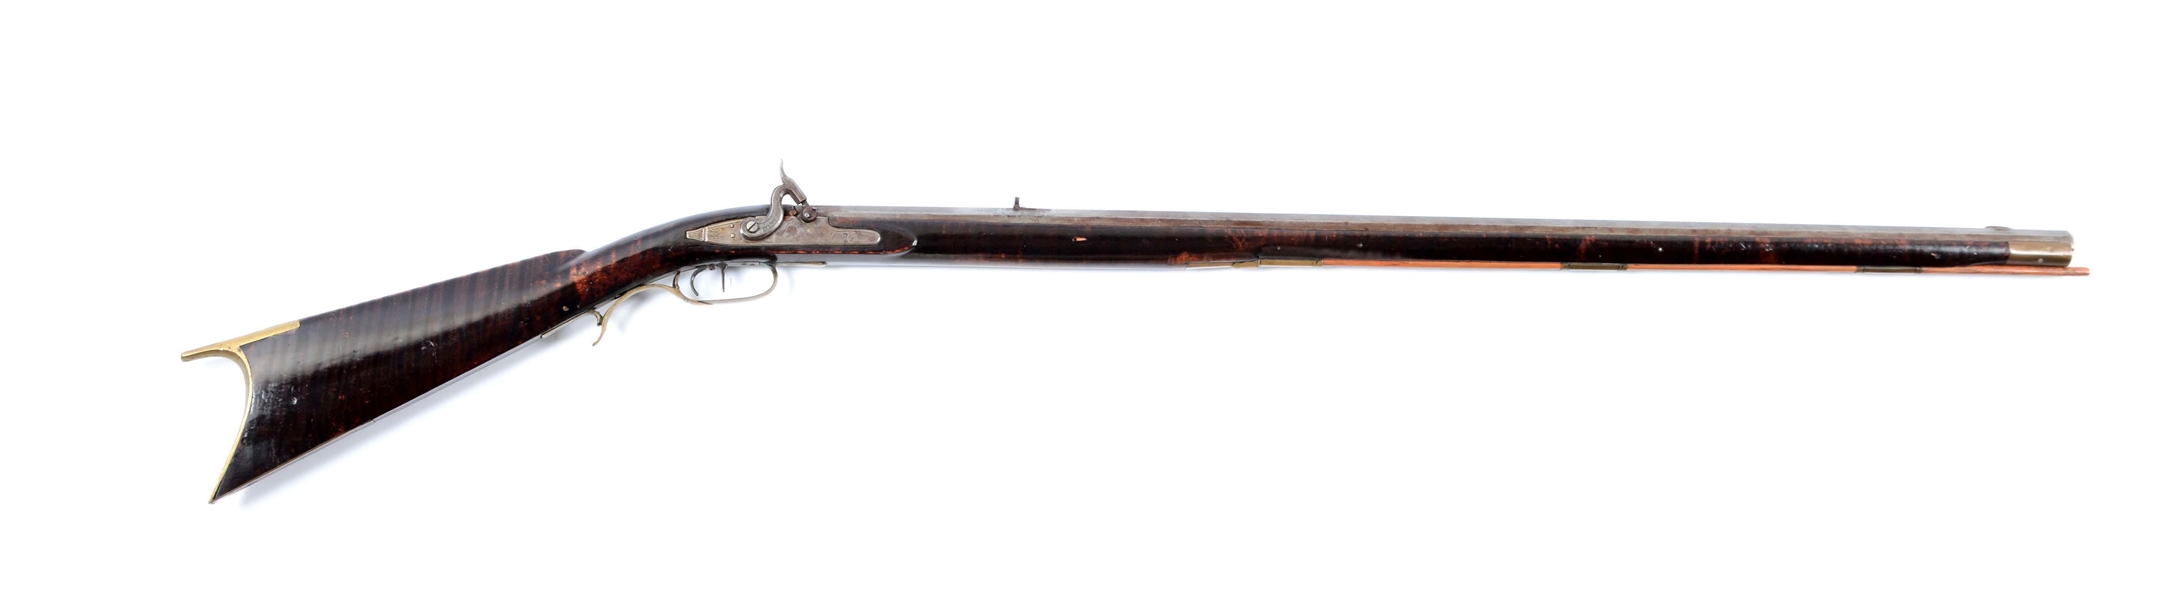 (A) FULL STOCKED PERCUSSION KENTUCKY RIFLE DATED "1881" SIGNED BY B. VORE OF BEDFORD. 